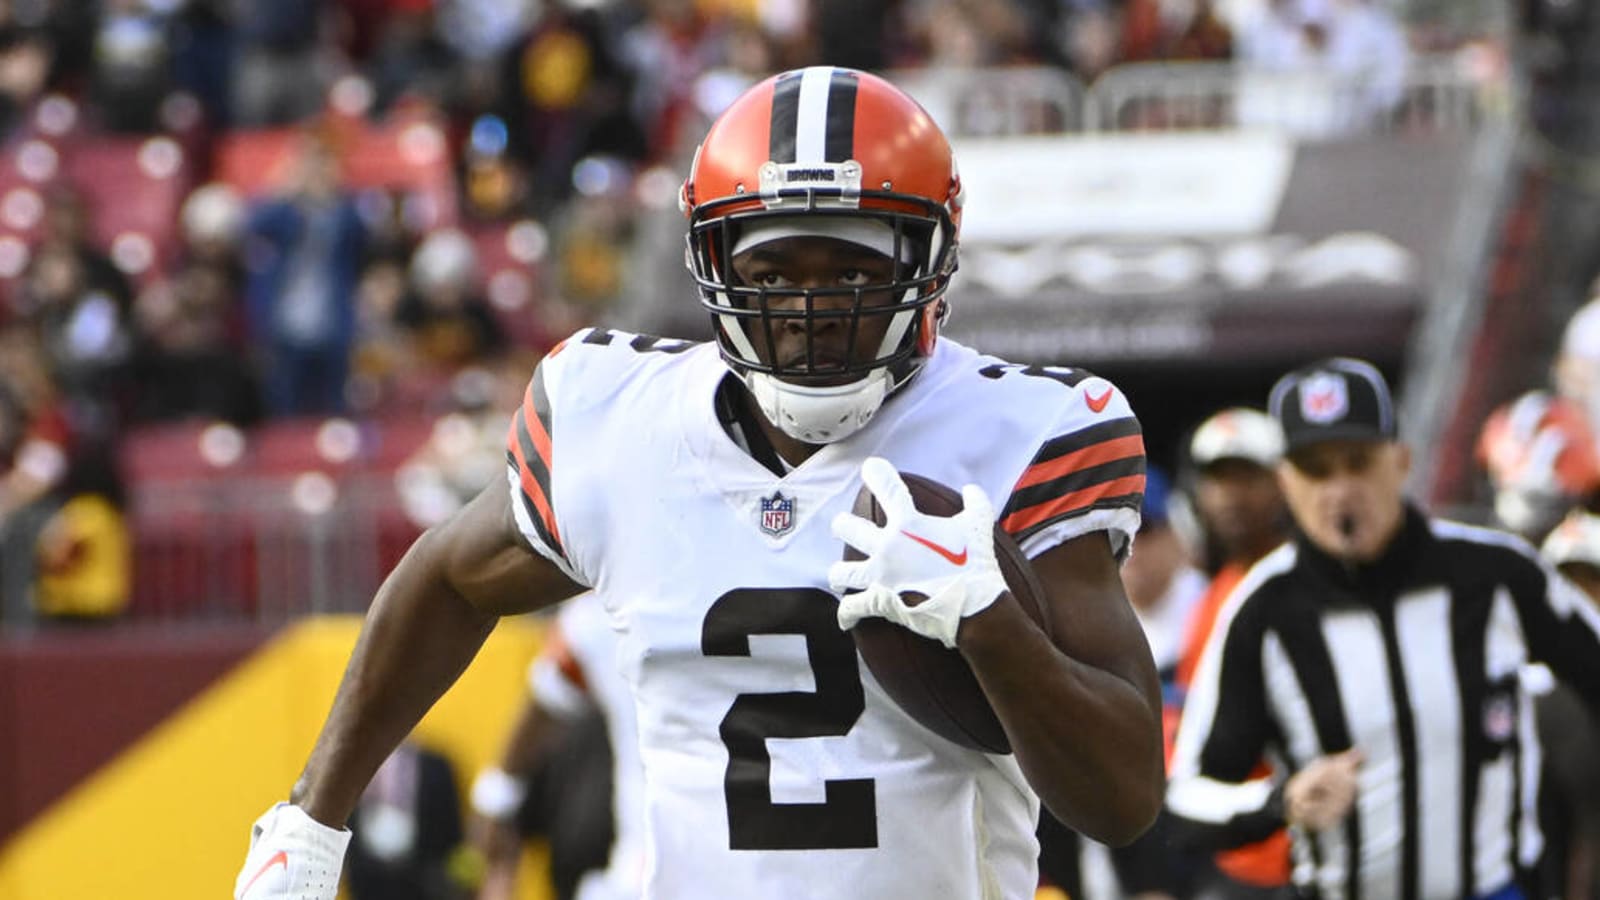 Even with Deshaun Watson out, Browns WR Amari Cooper seems confident